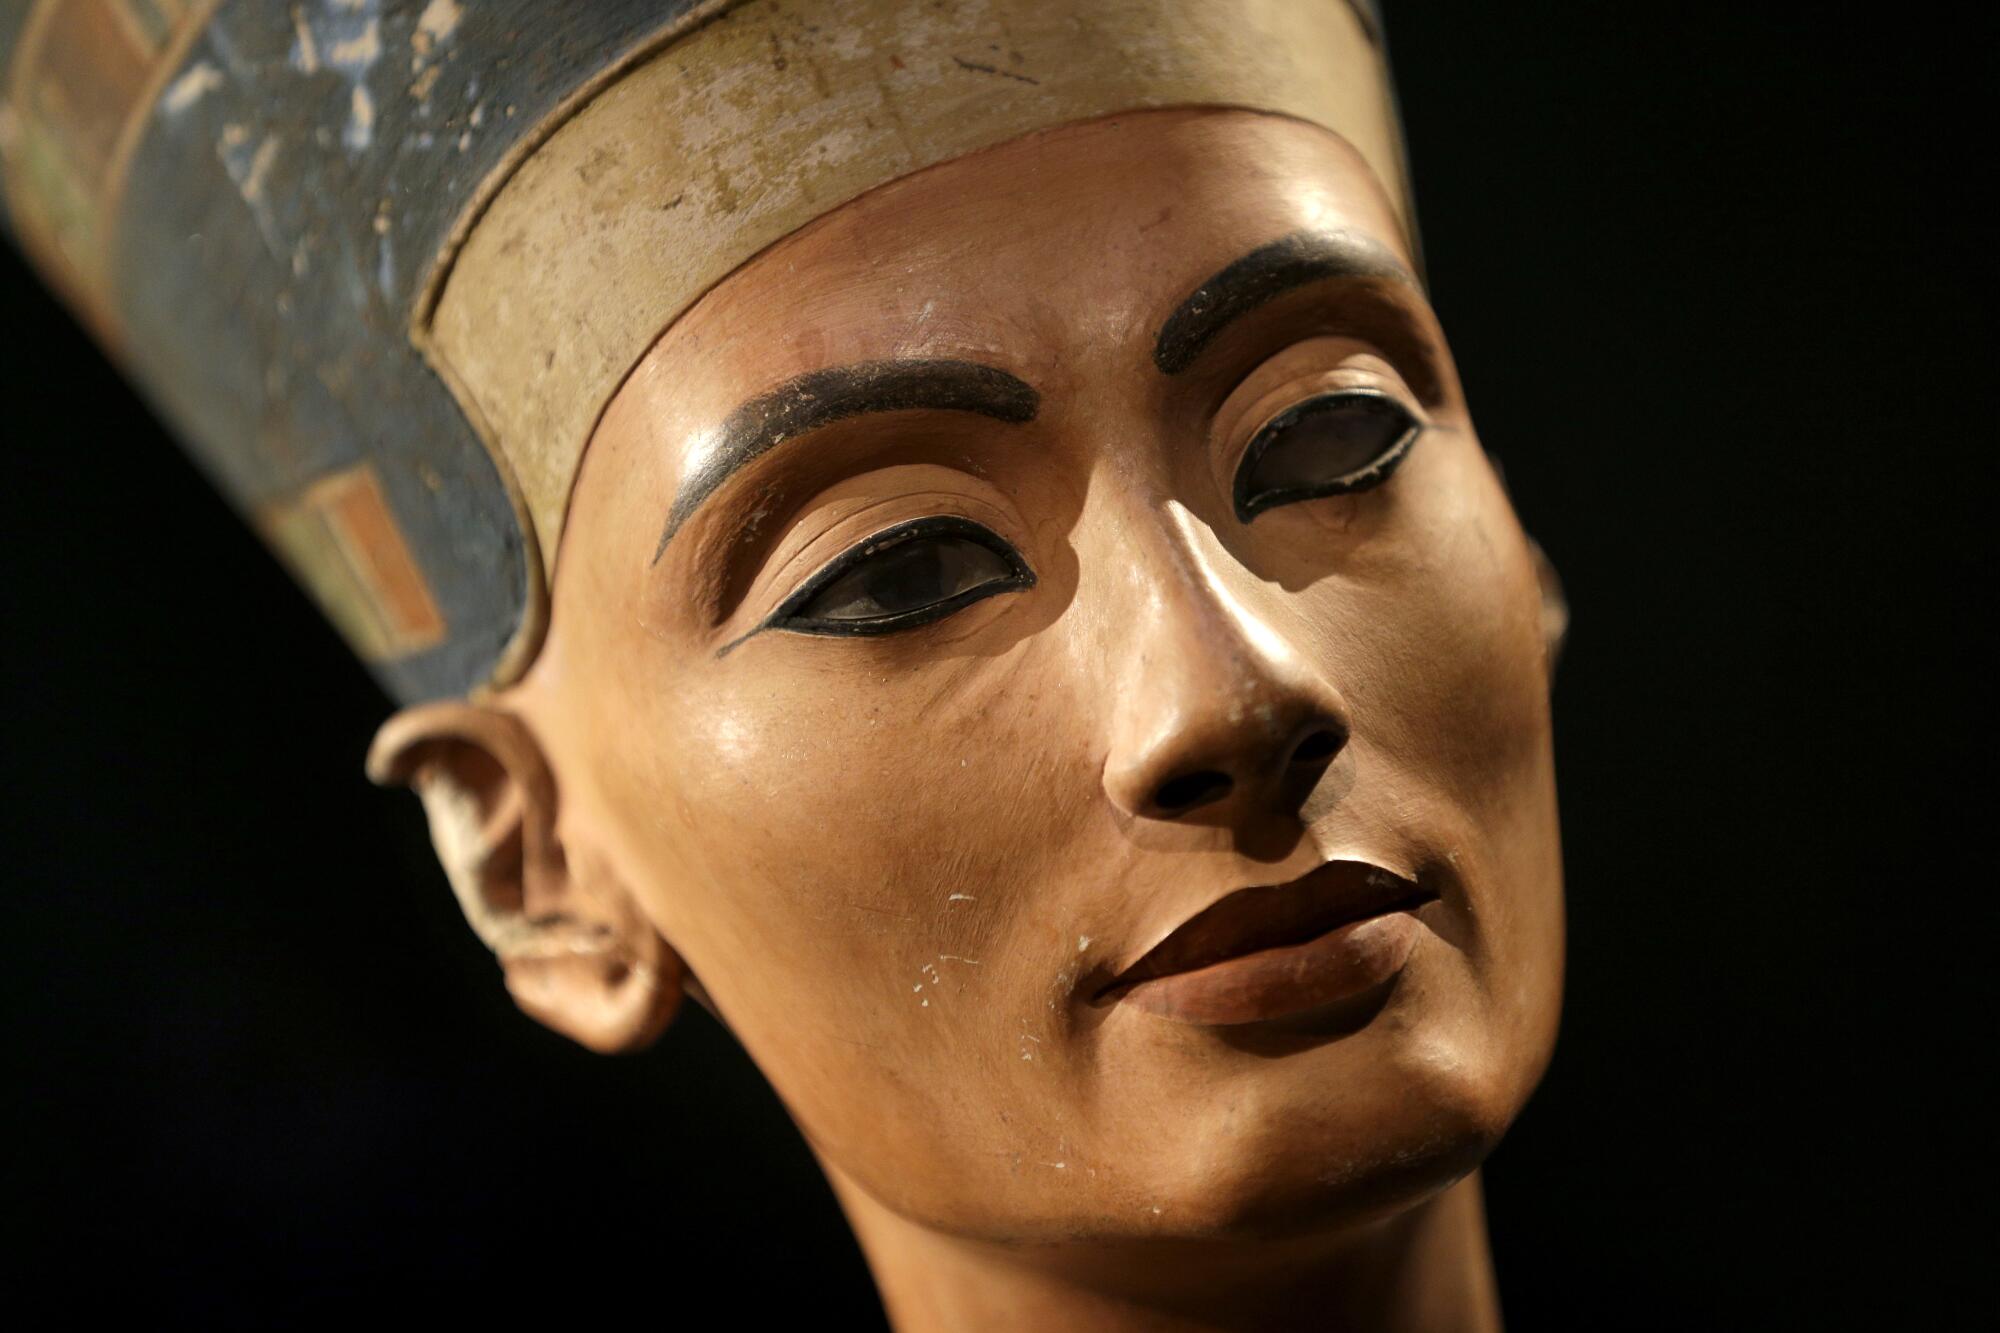 The bust of ancient Egyptian Queen Nefertiti.